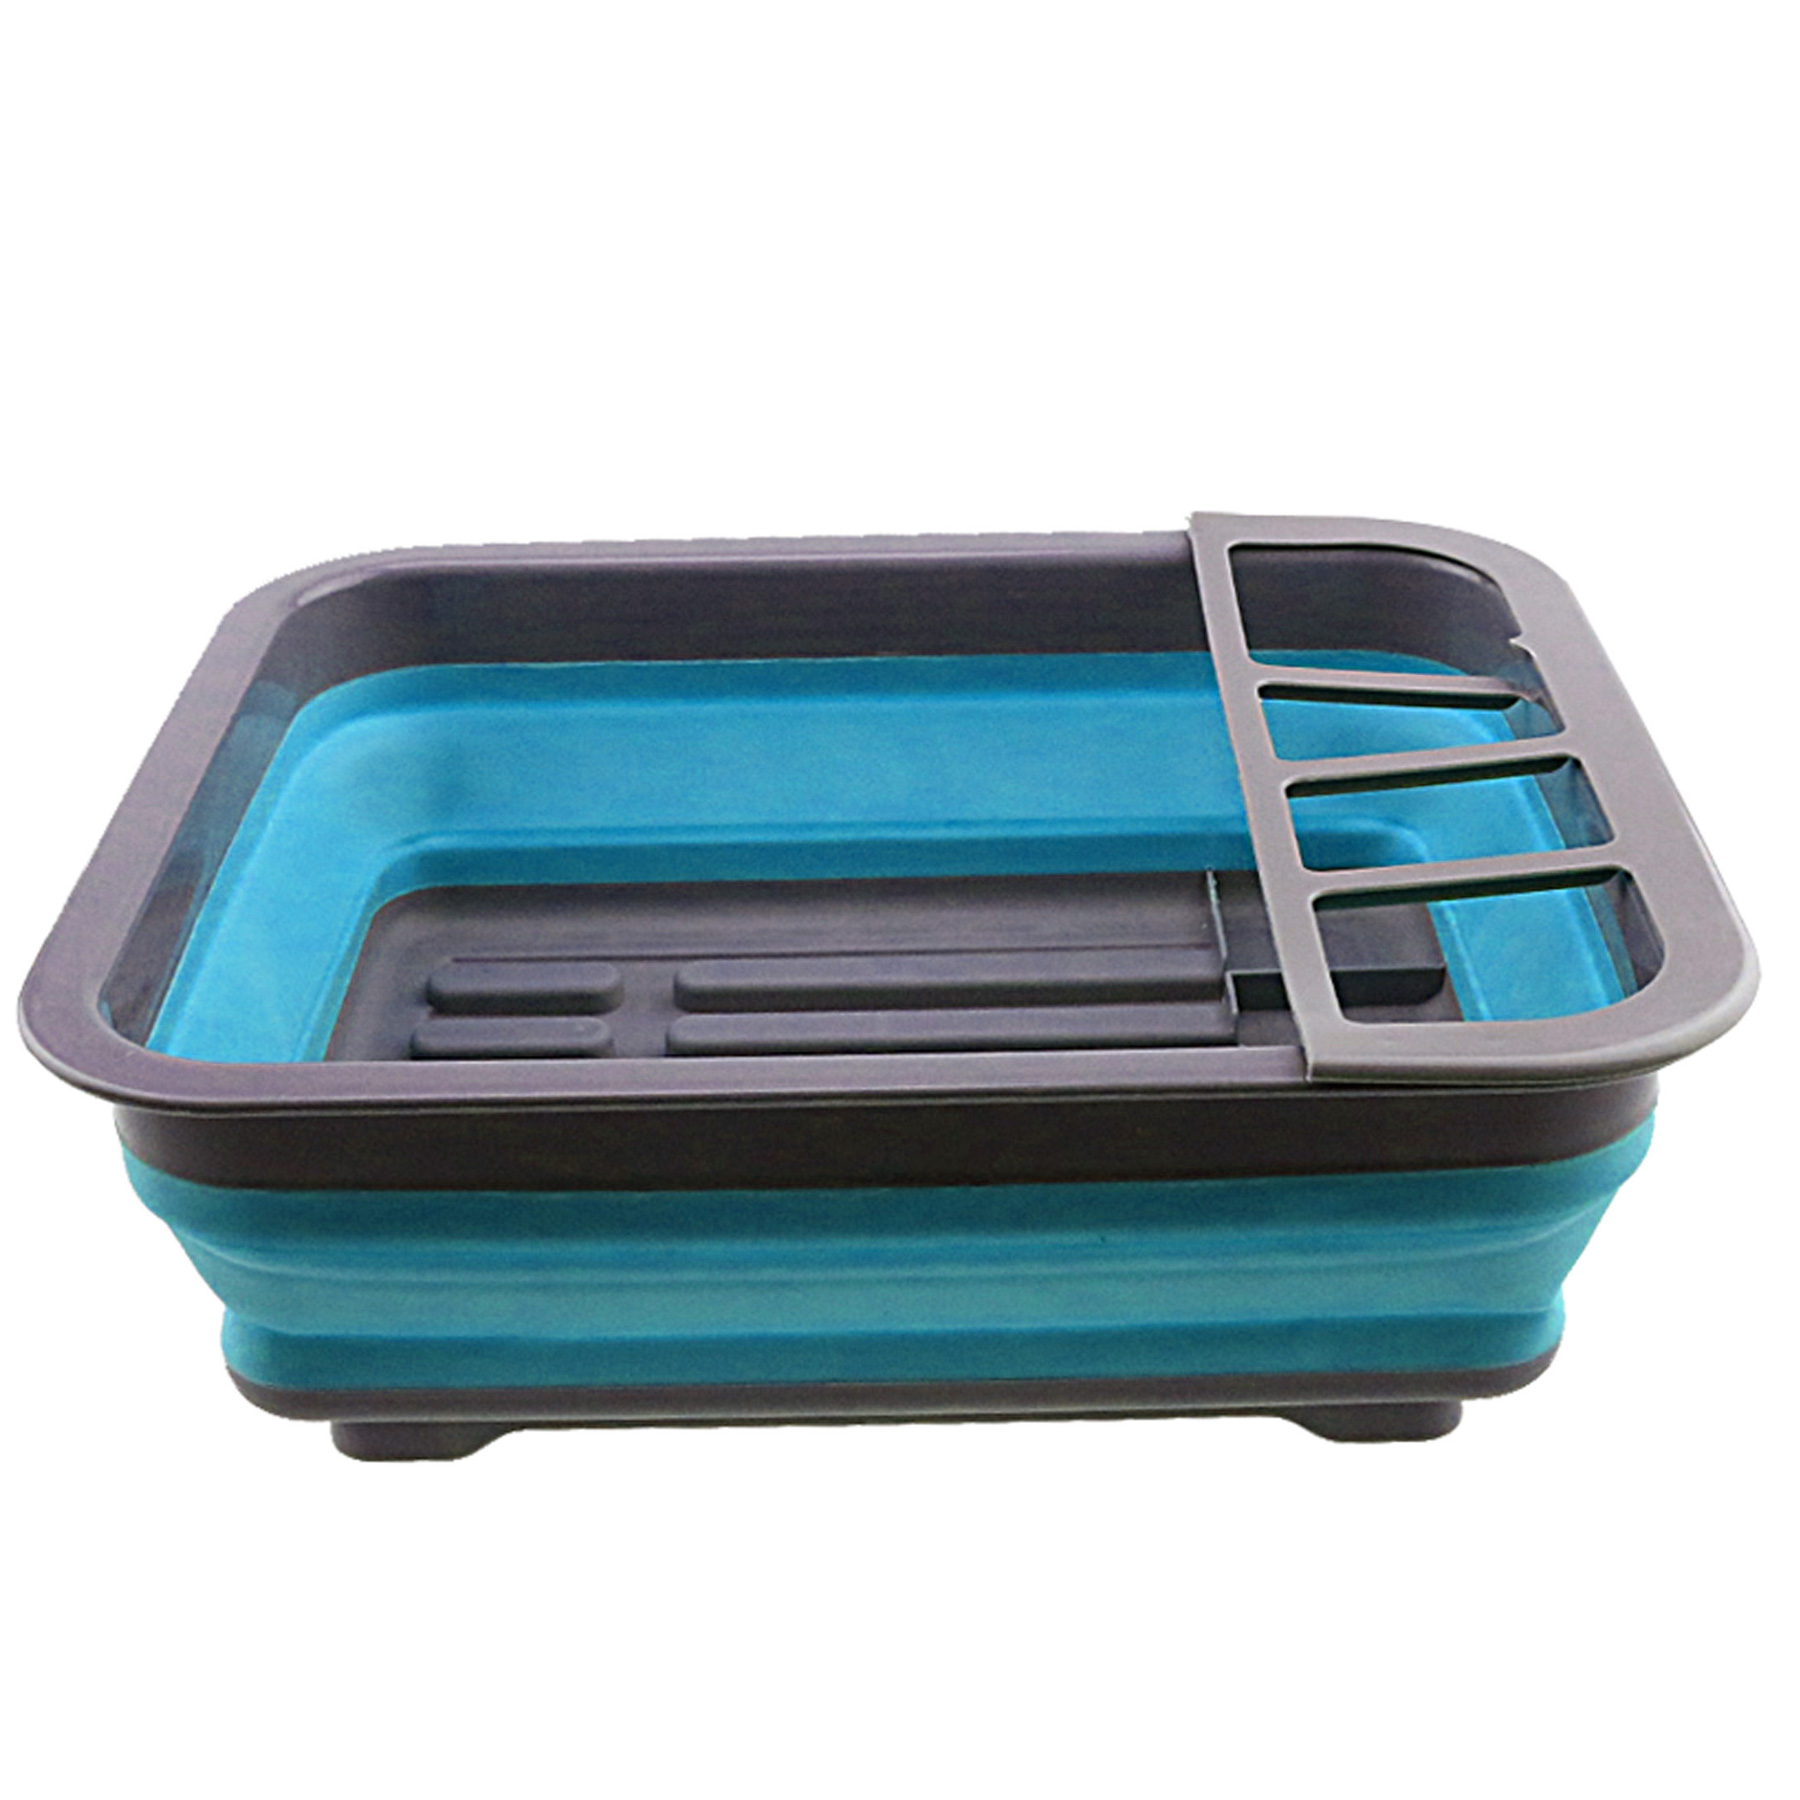 https://www.wilcor.net/productimages/hou0202_collapsable_dish_drainer_open.jpg